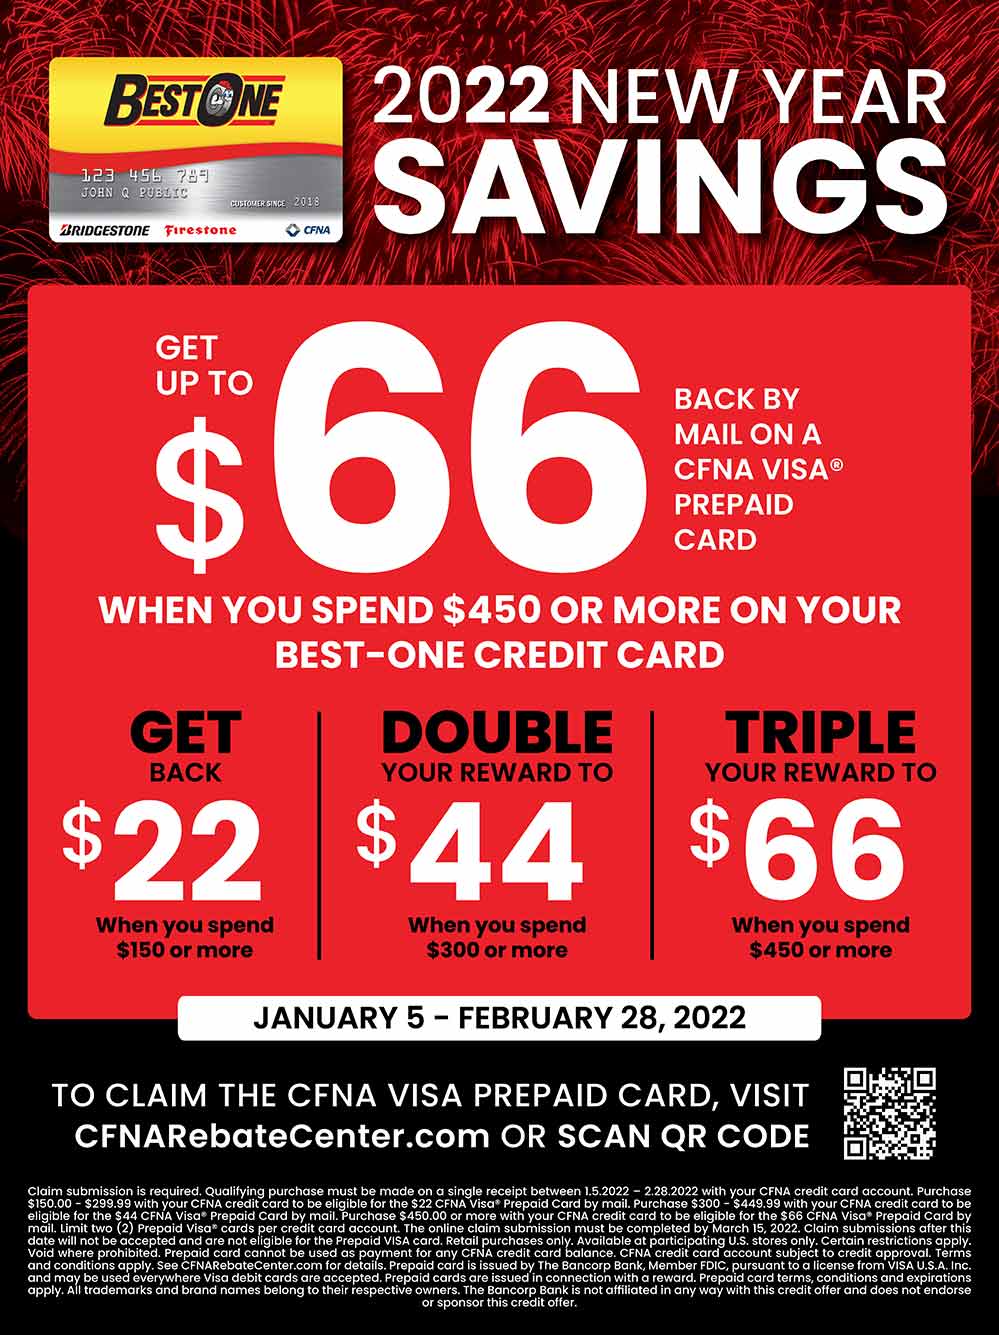 Best One Tires - 2022 New Year Savings - Get up $66 back by mail on a CFNA Visa Prepaid card. Valid 01/05/2022 - 02/28/2022